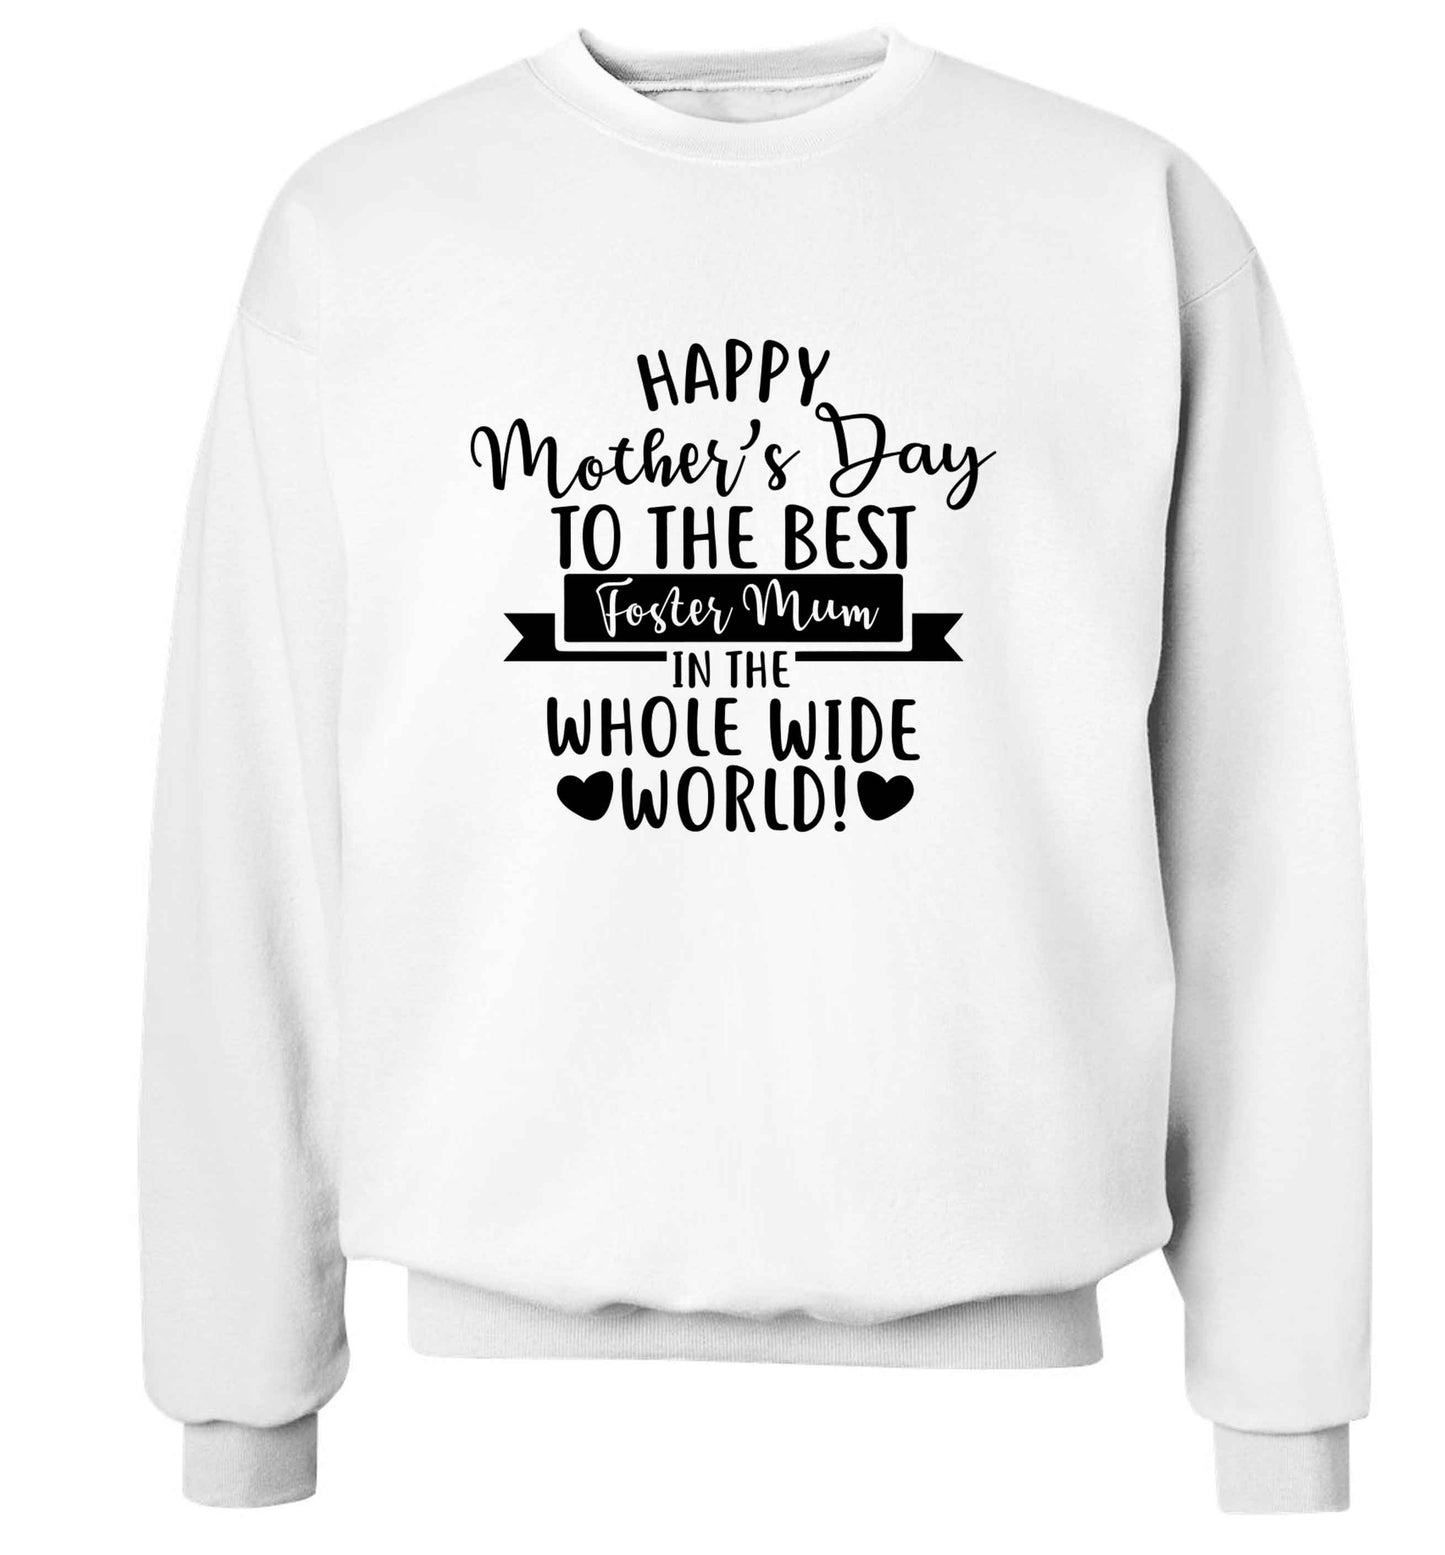 Happy mother's day to the best foster mum in the world adult's unisex white sweater 2XL